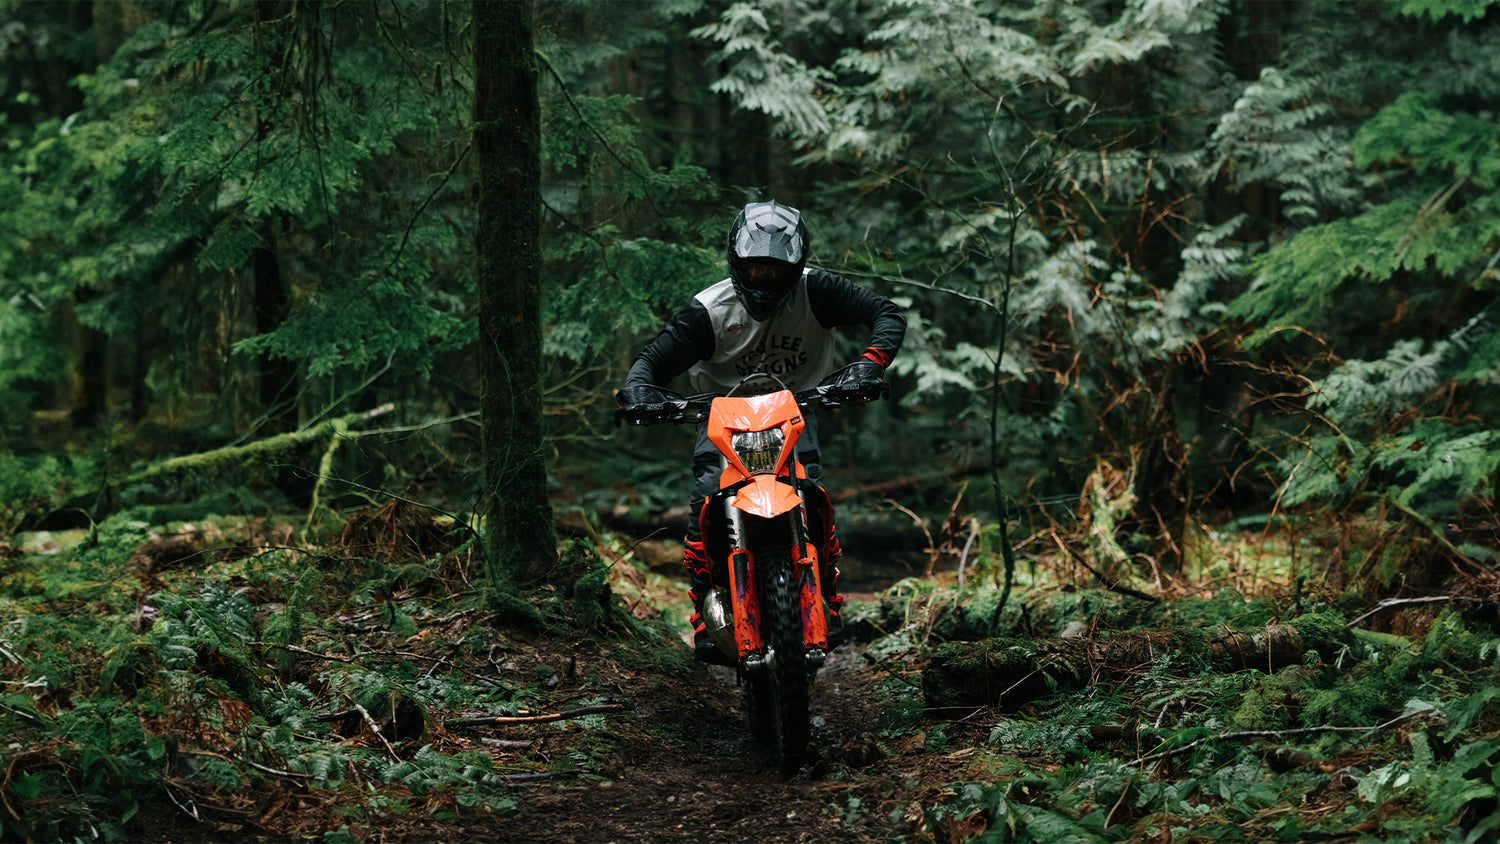 GP Rider going through the forest